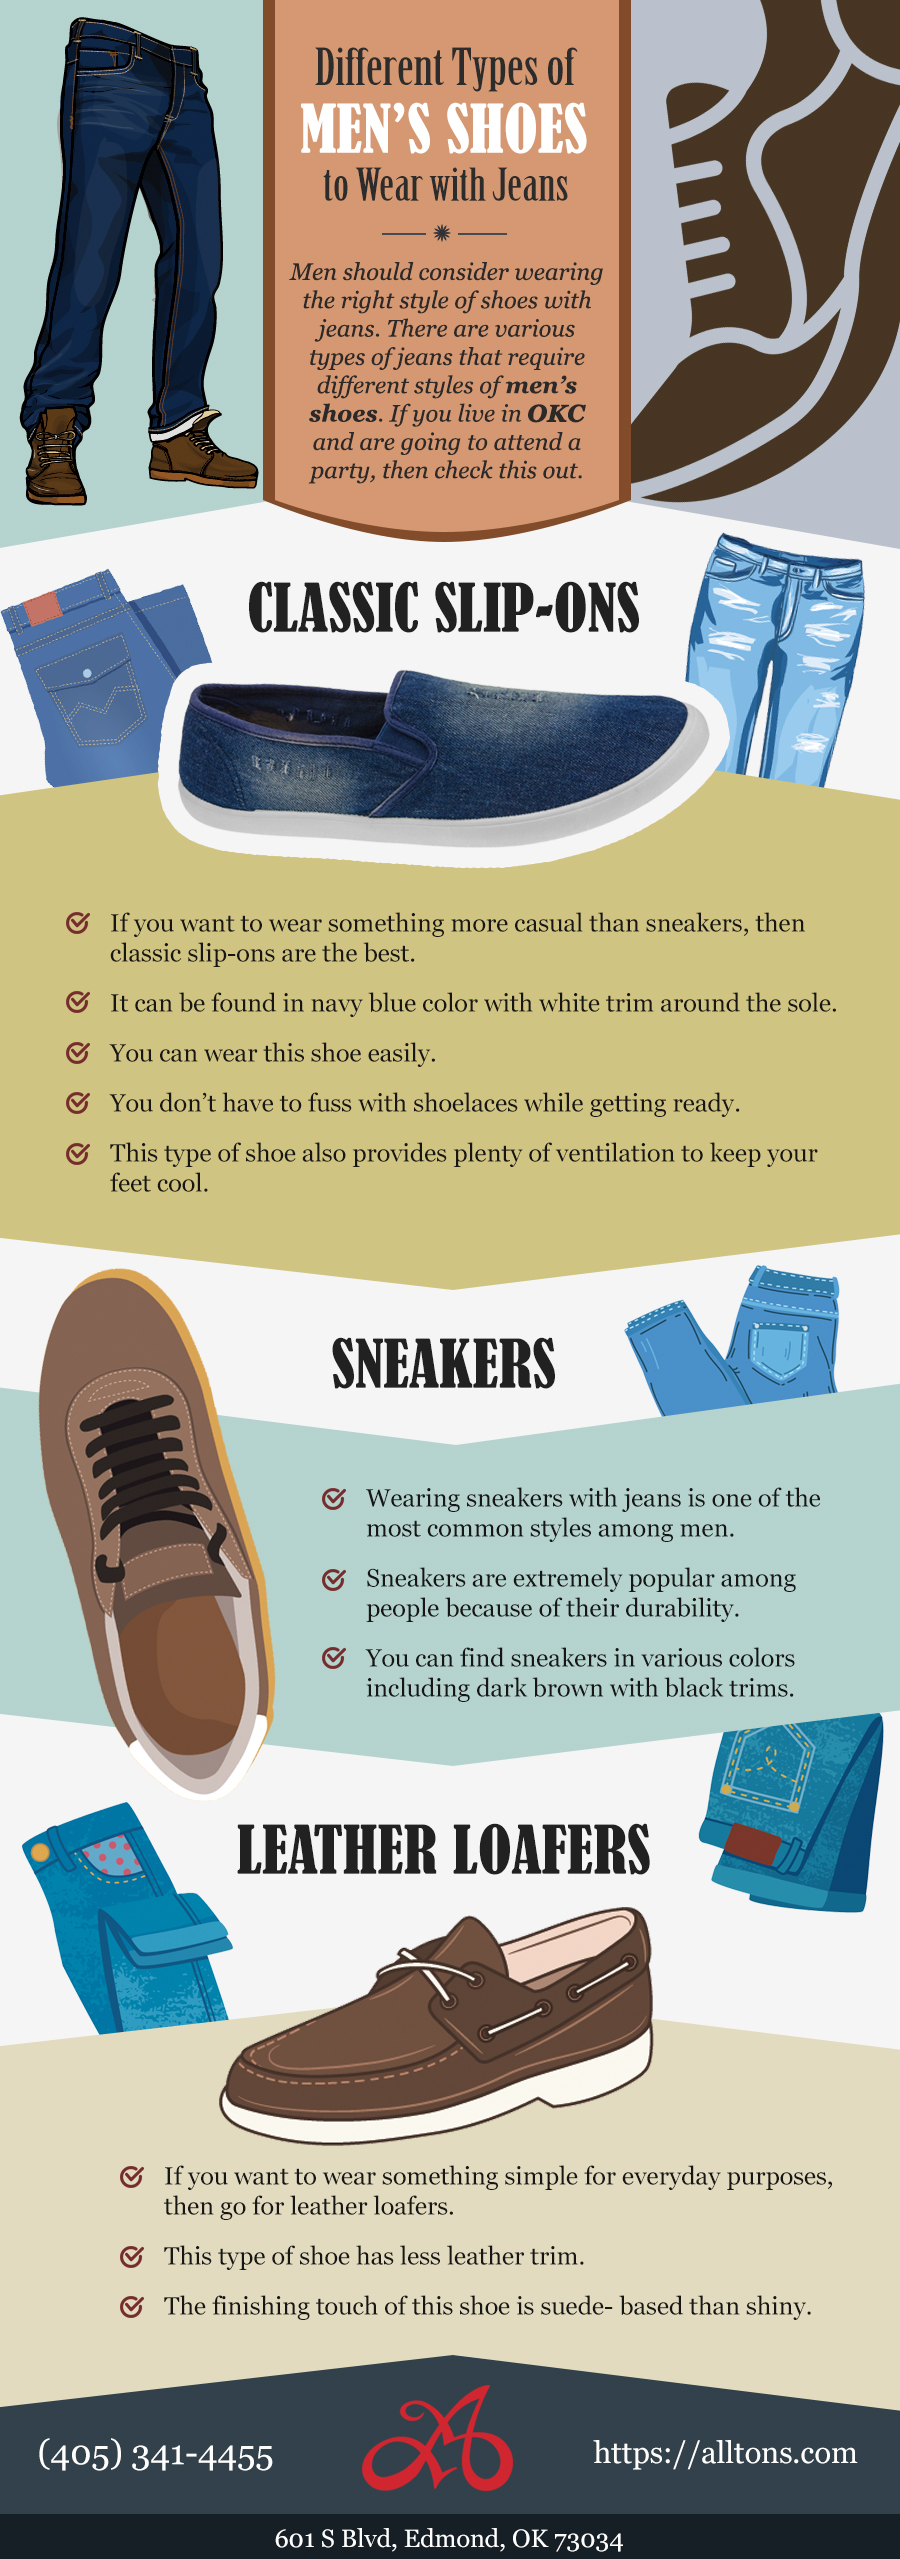 Different Types Of Men's Shoes To Wear With Jeans